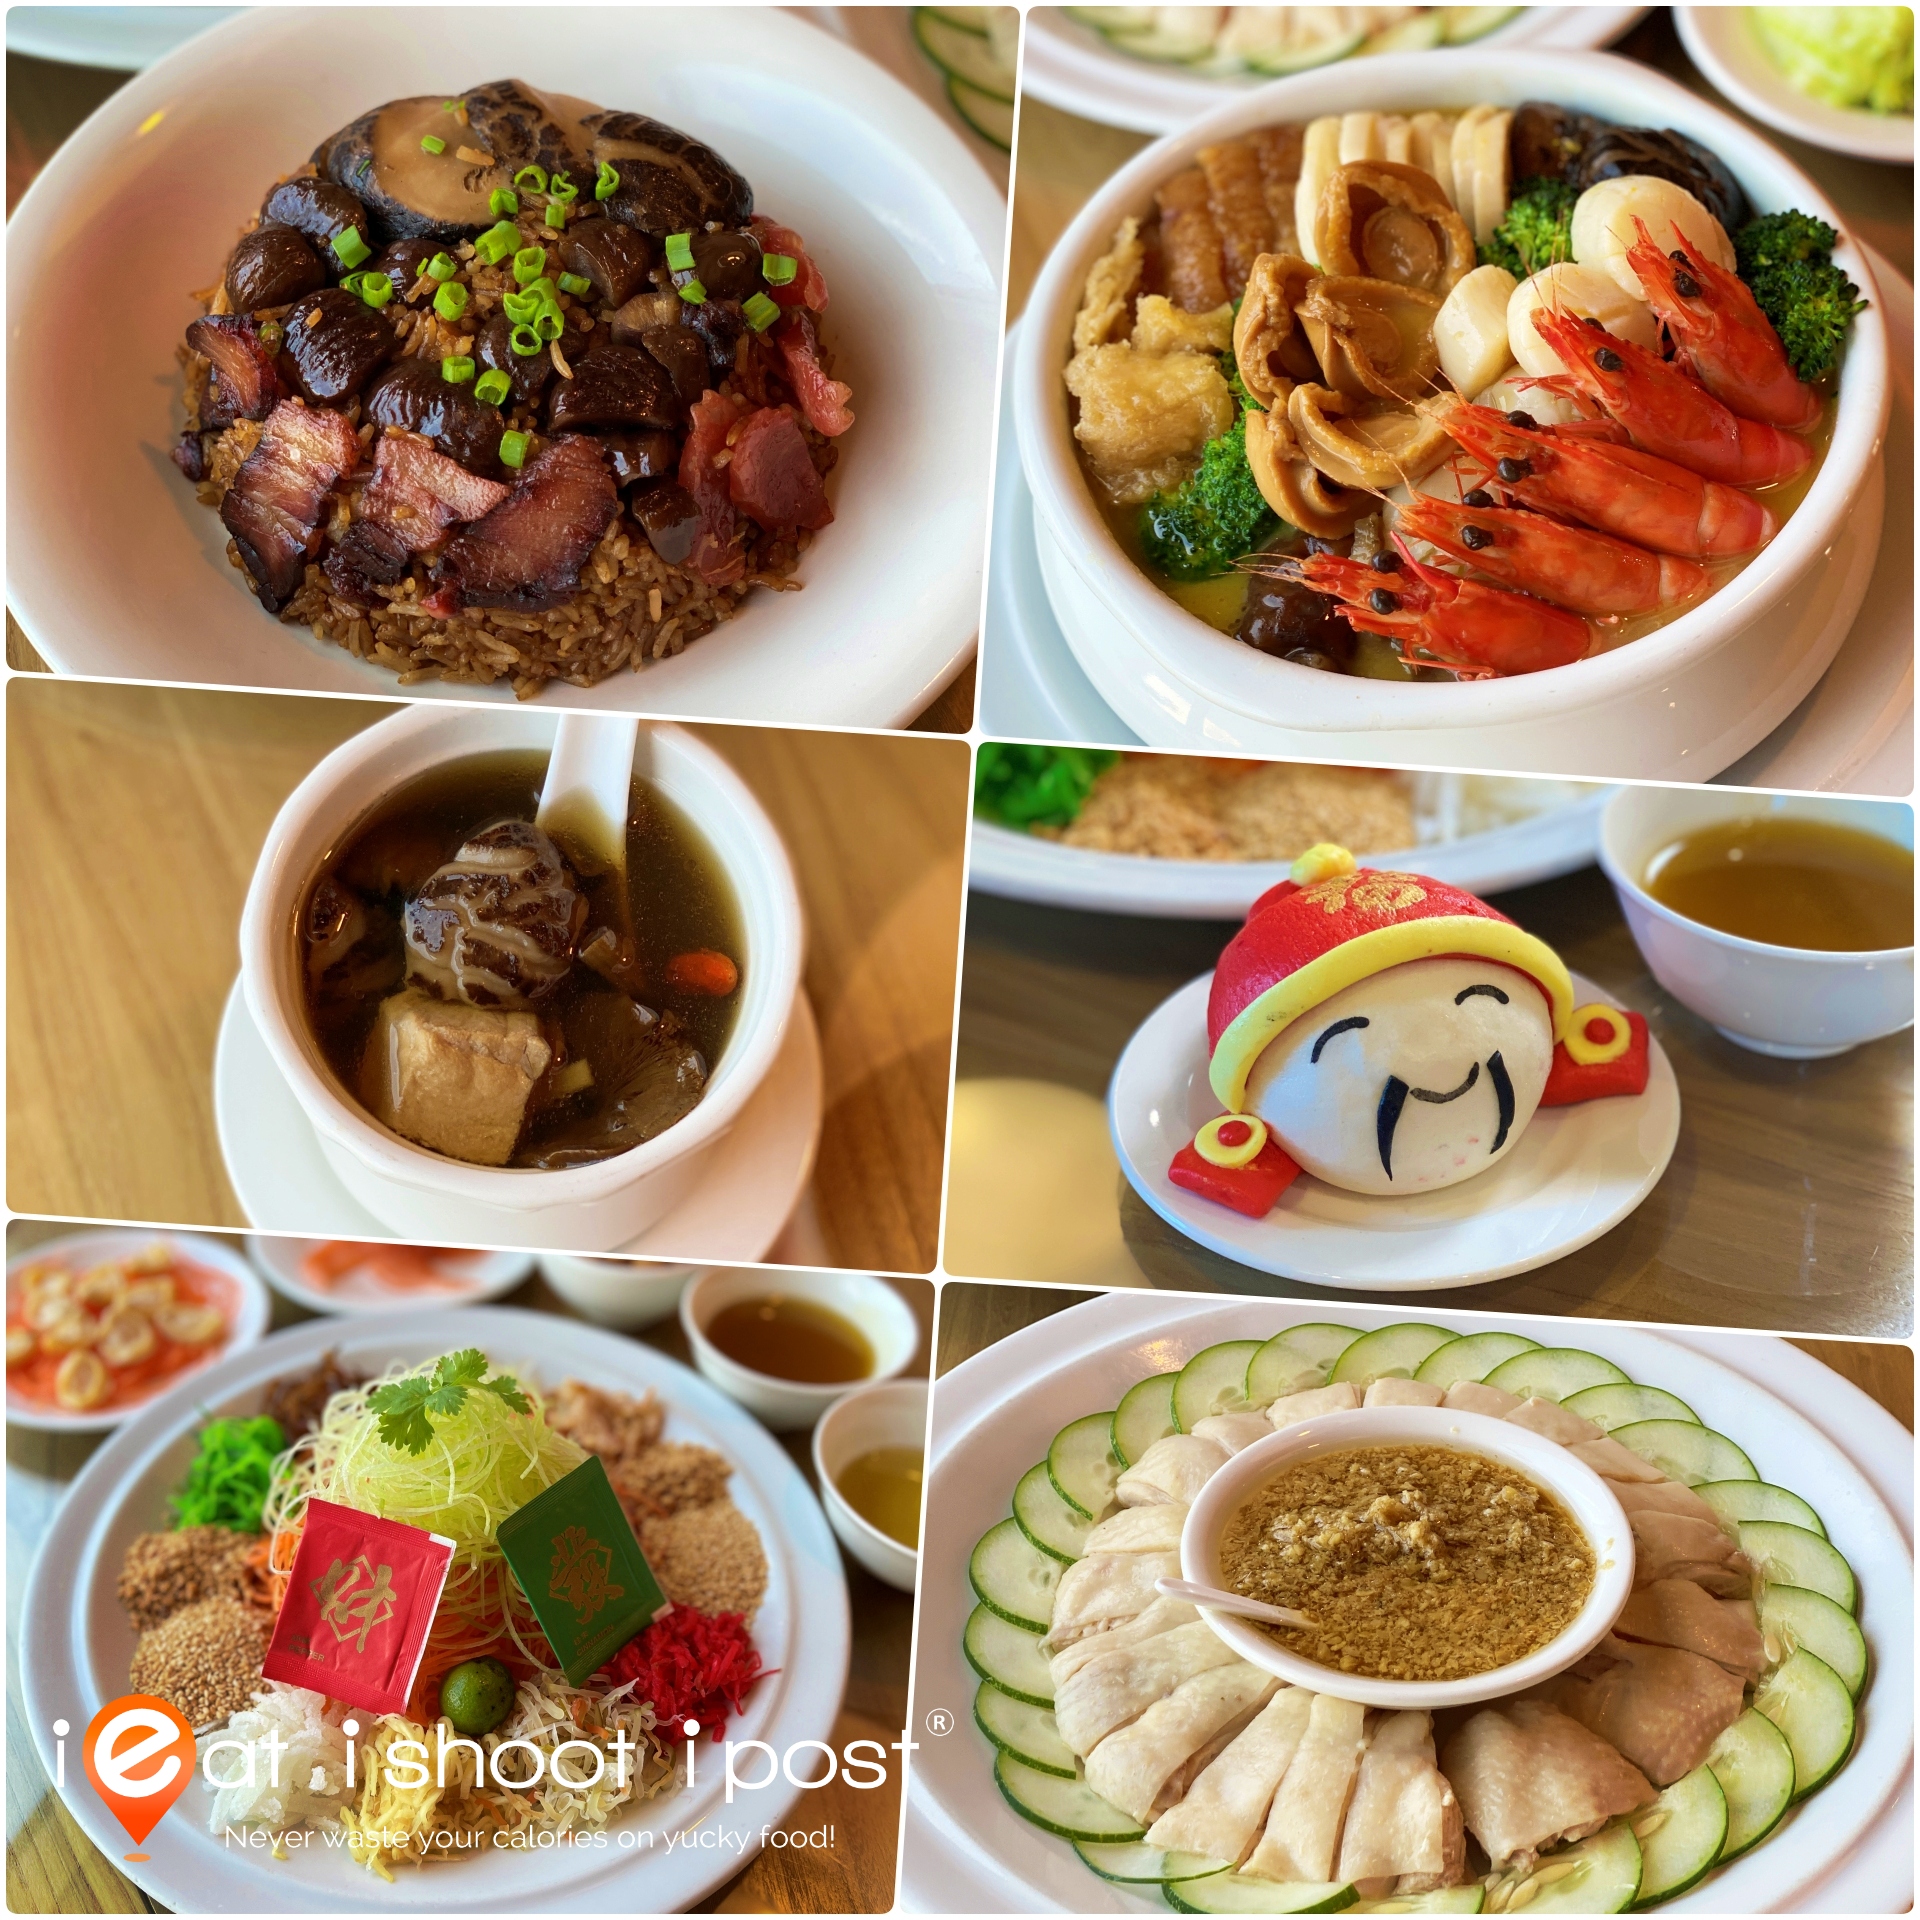 Clockwise from top left: Steamed rice with Chinese sausage and braised mushroom, Wellness Collagen Treasure Pot, Fa Cai Bao Bao bun, Samsui Ginger Chicken, Yu Sheng with salmon and baby abalone, Double-boiled golden mushroom soup with dried scallop